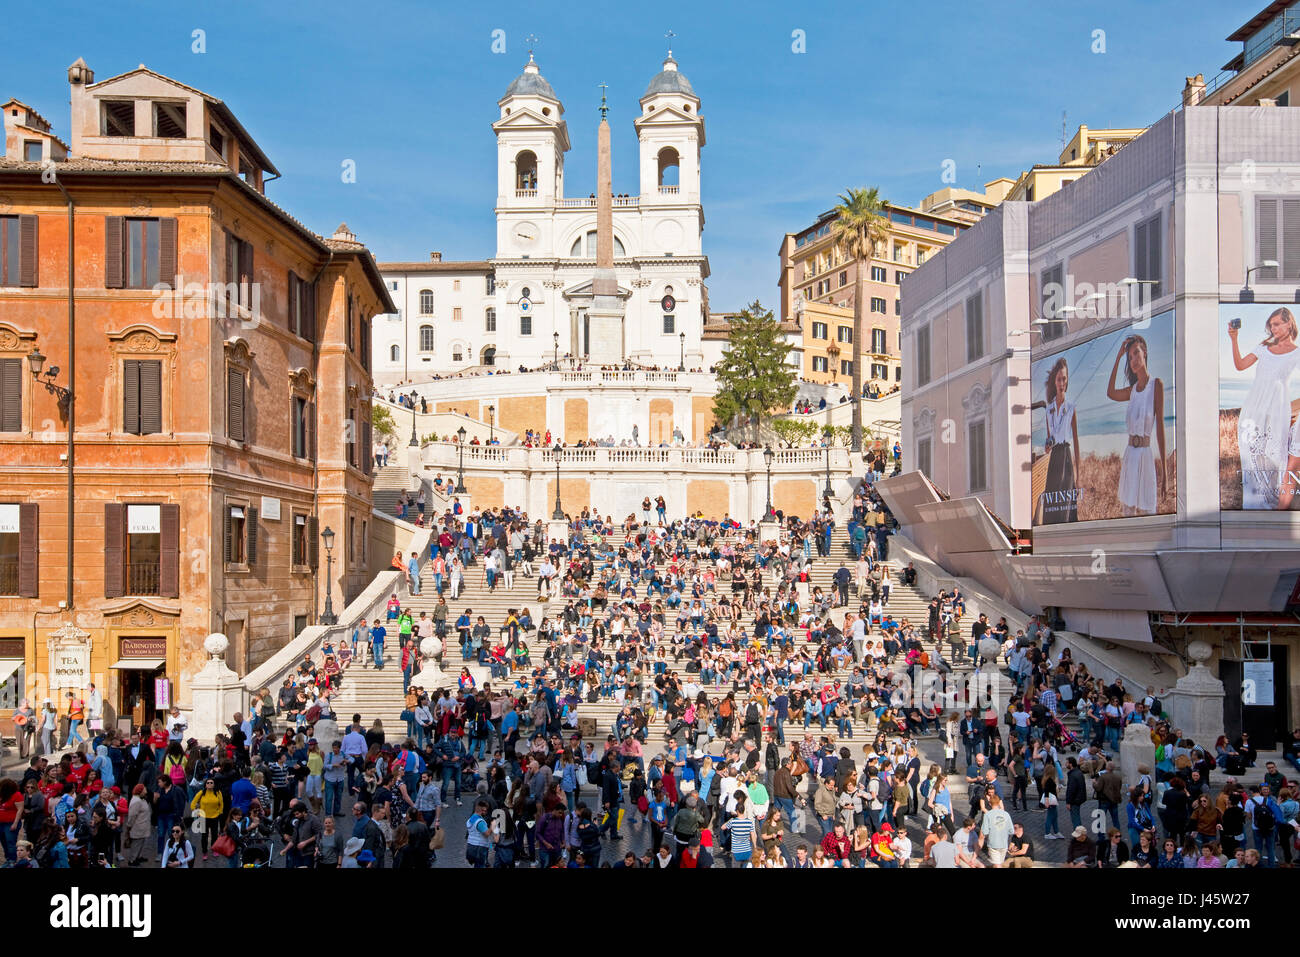 Spanish Steps in Rome with crowds of tourists and visitors on a sunny day with blue sky and the Trinità dei Monti church in the background. Stock Photo